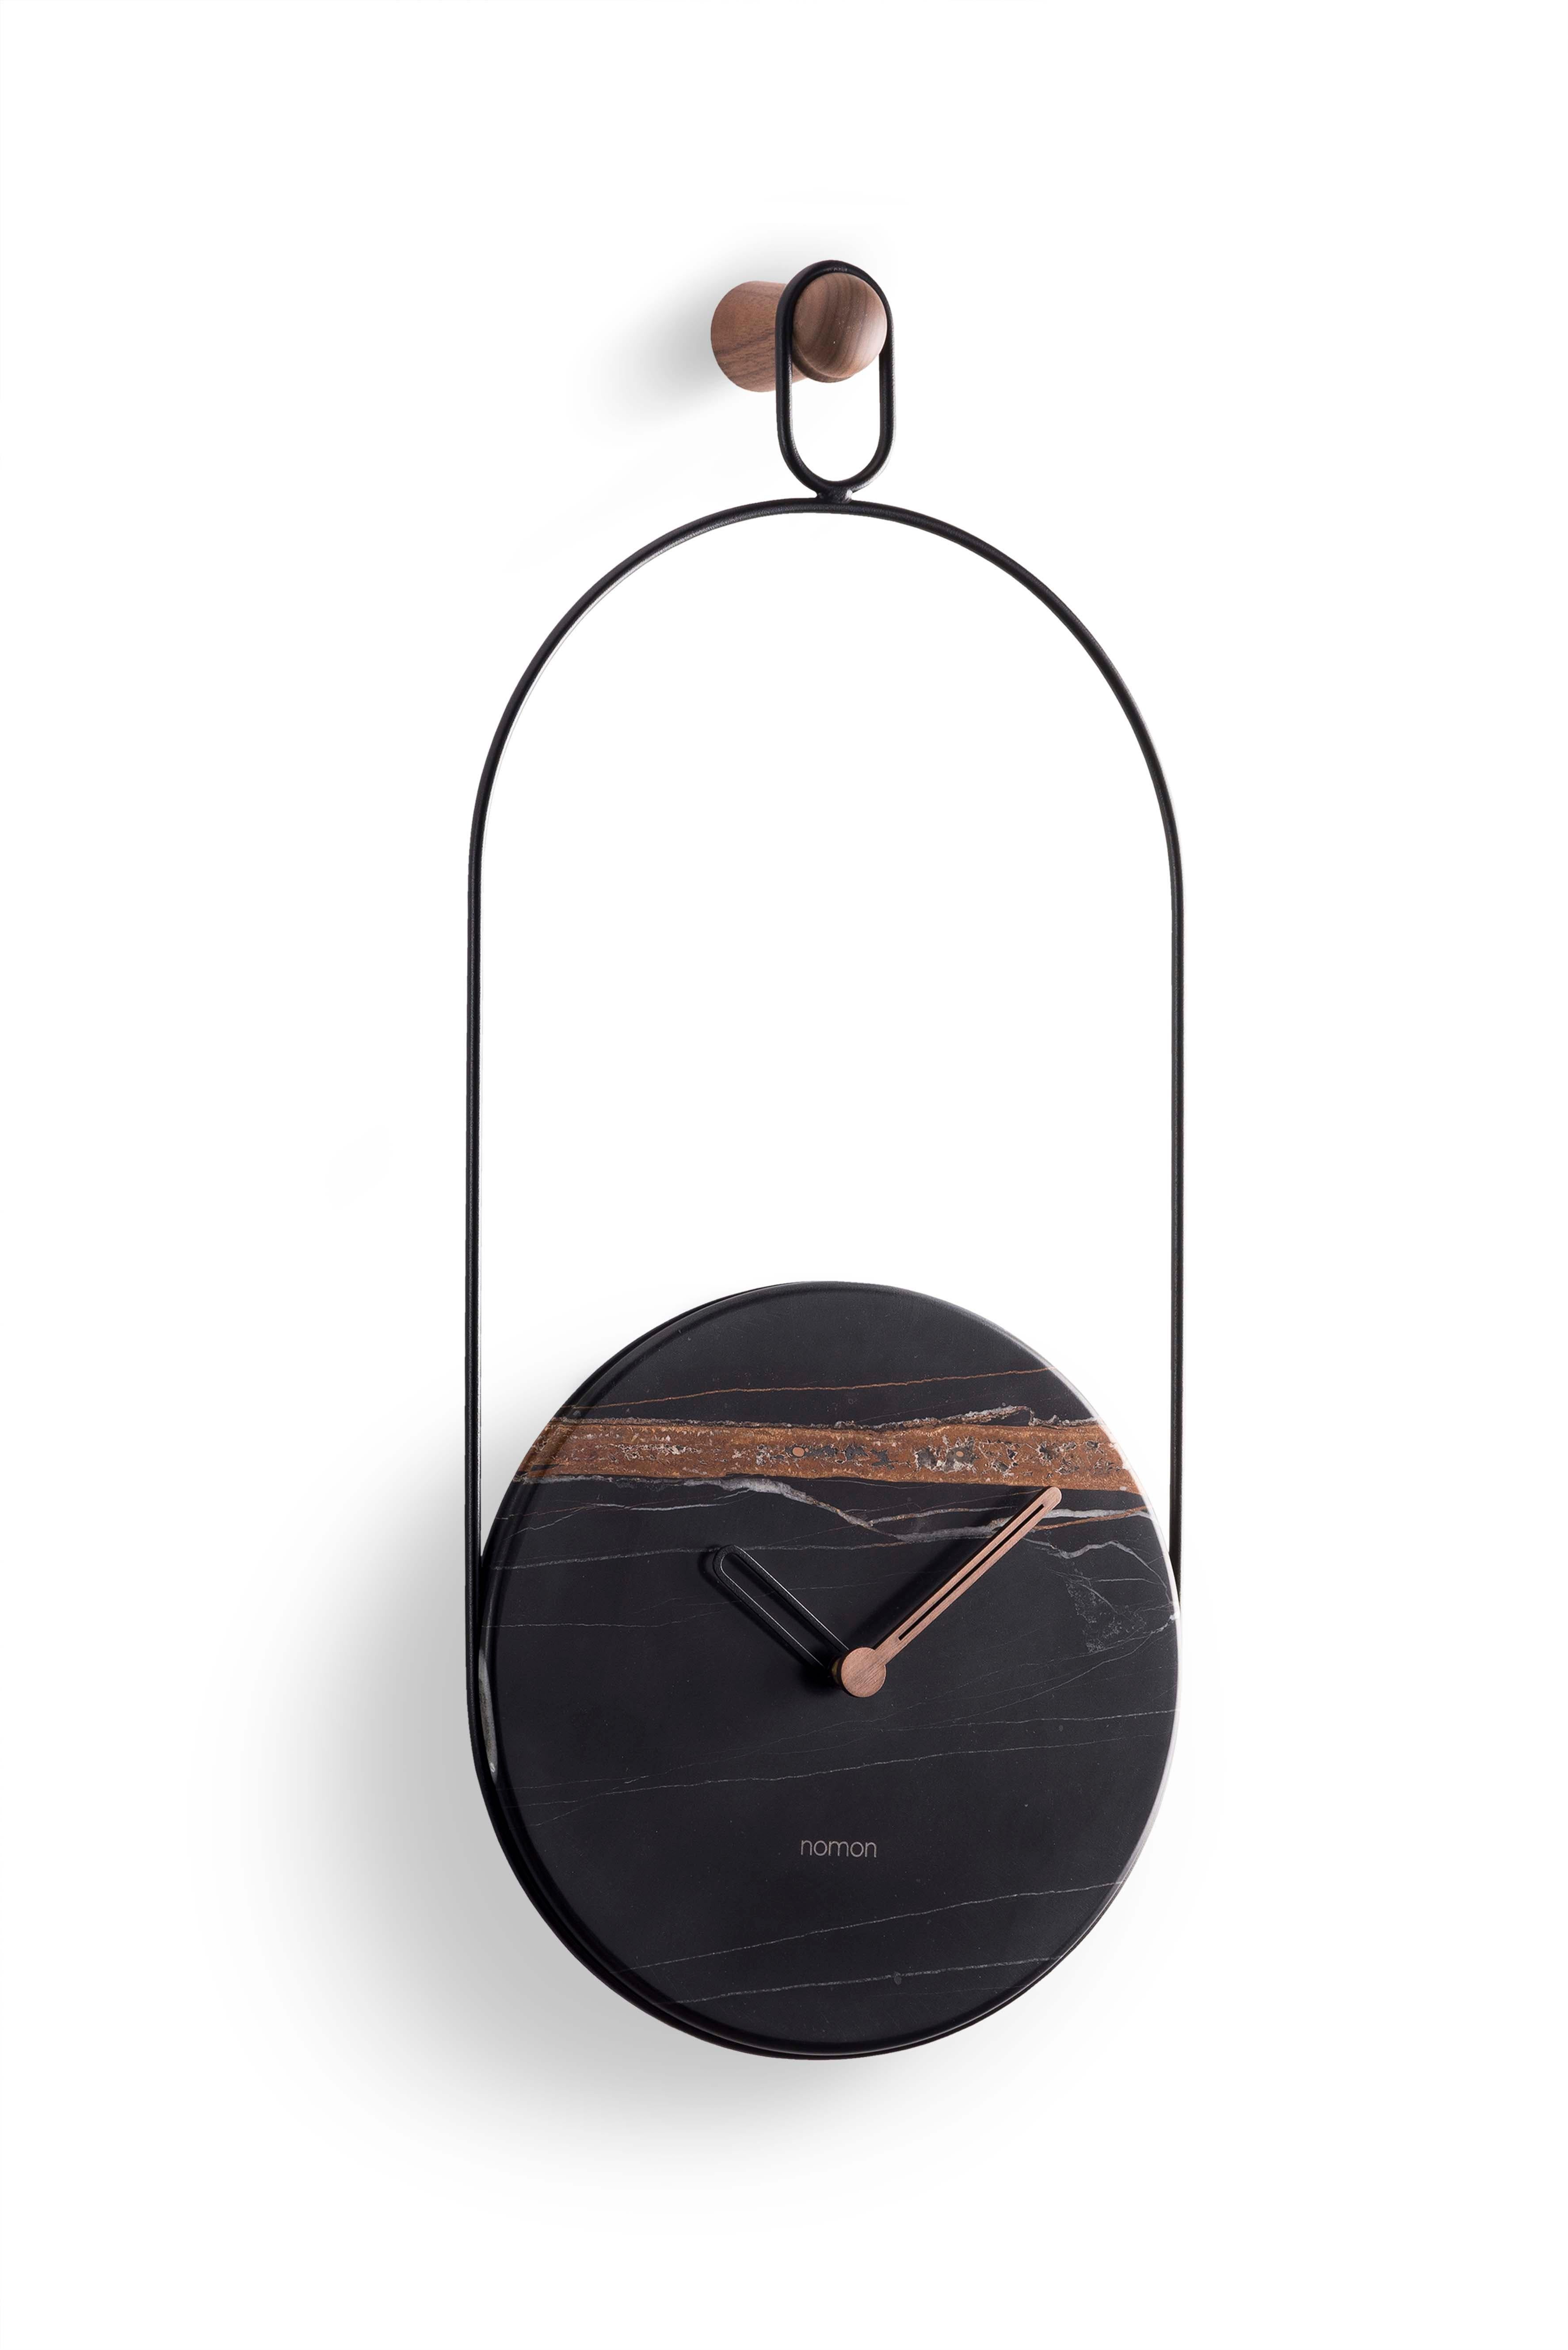 Contemporary Nomon Eslabon Wall Clock  By Andres Martinez For Sale